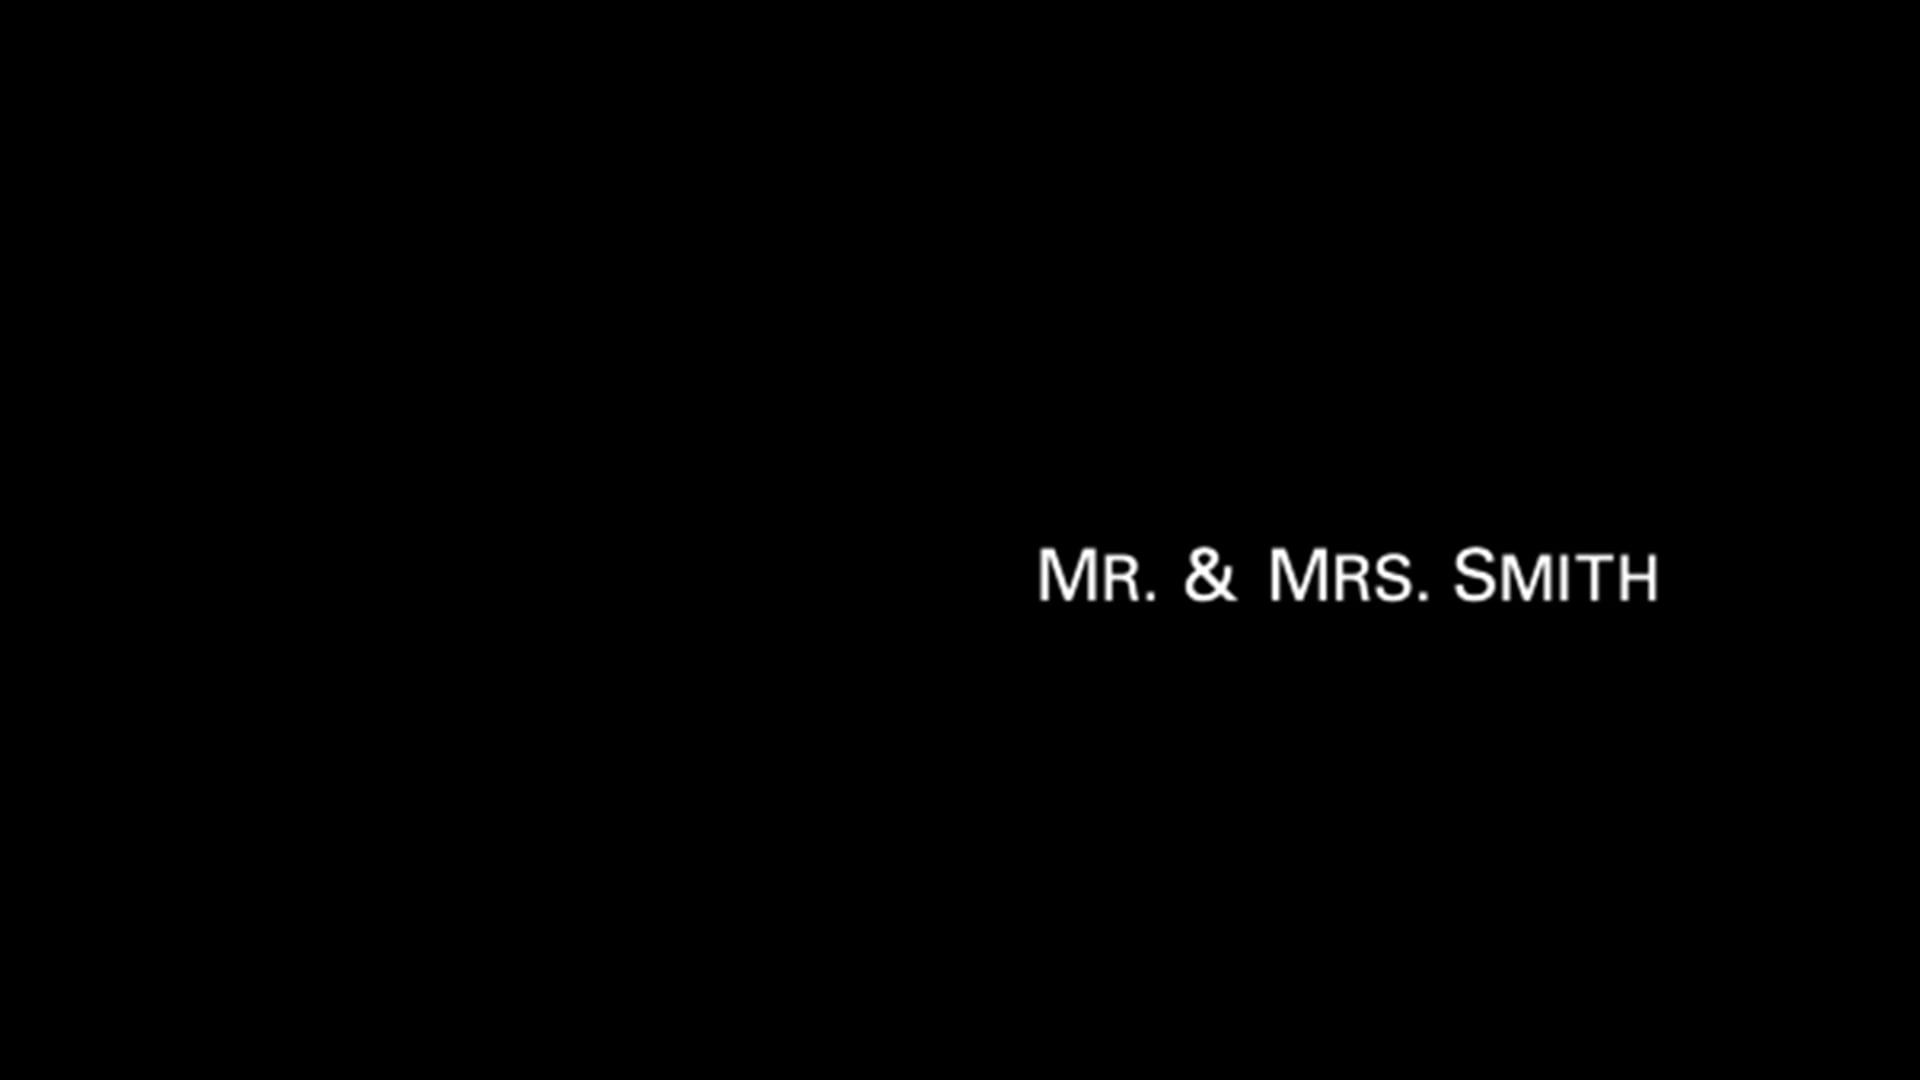 Mr. & Mrs. Smith - Main Title Sequence